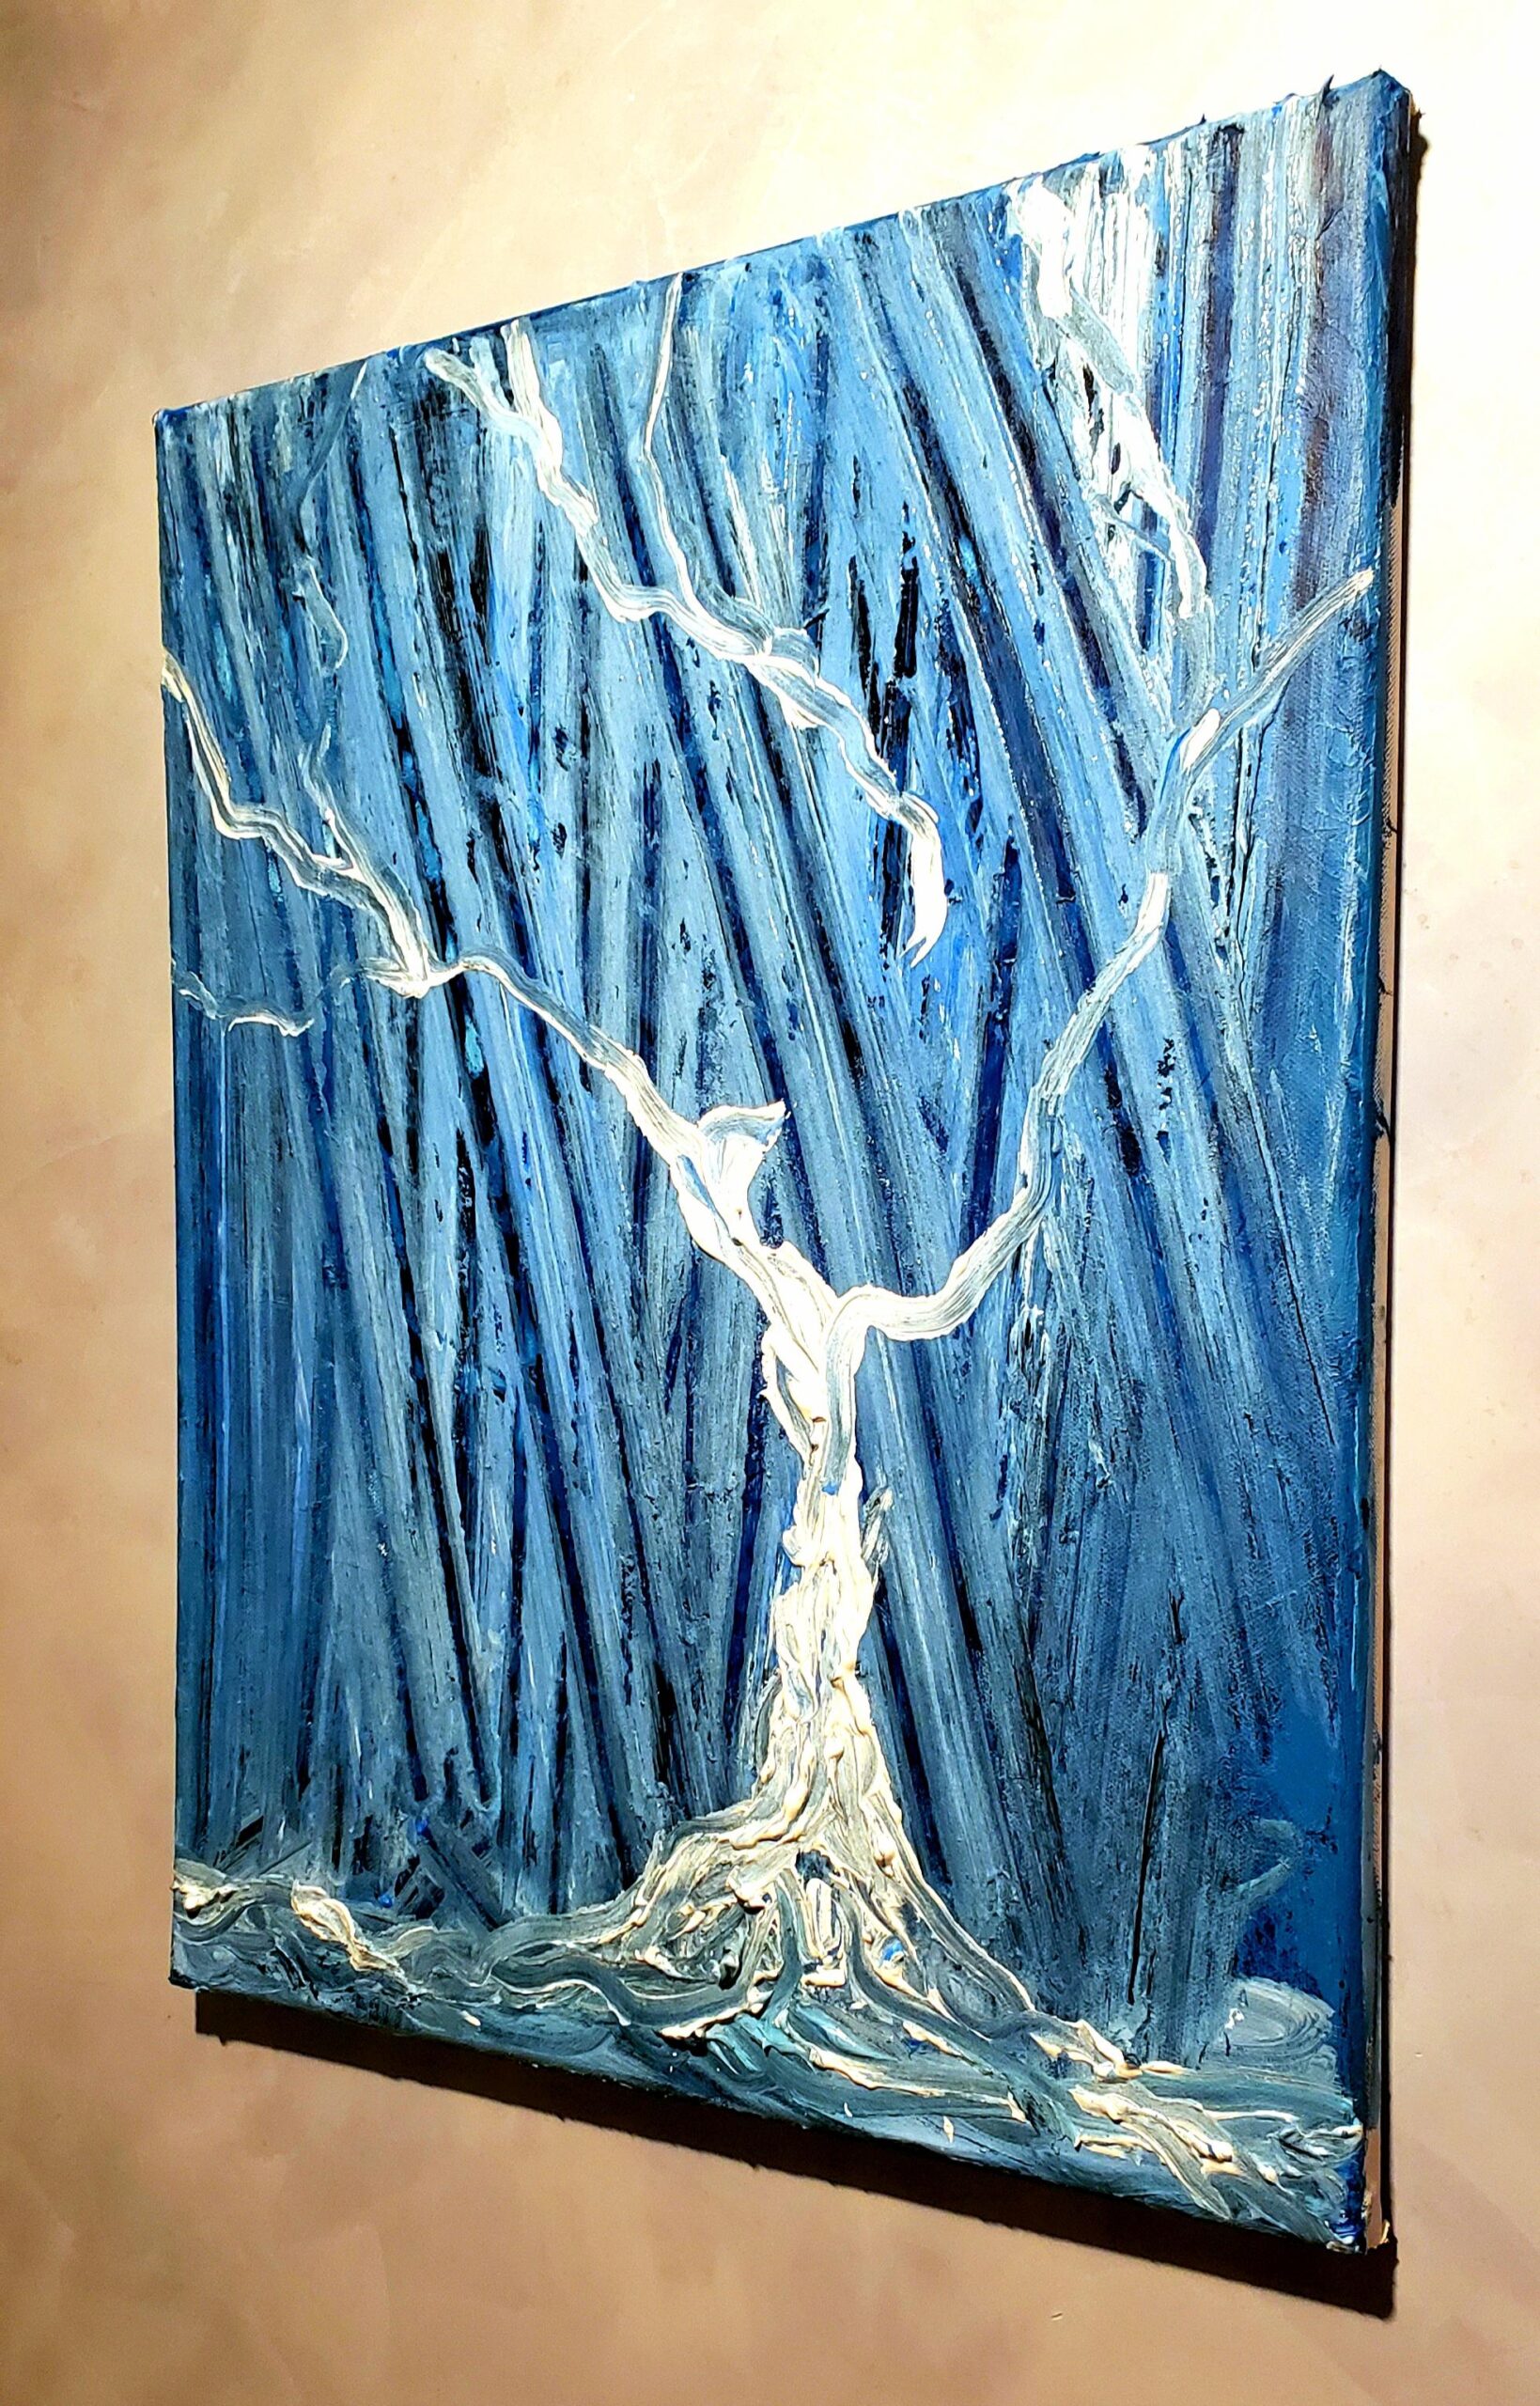 Winter gentle, acrylic on canvas, from my imagination, NYC